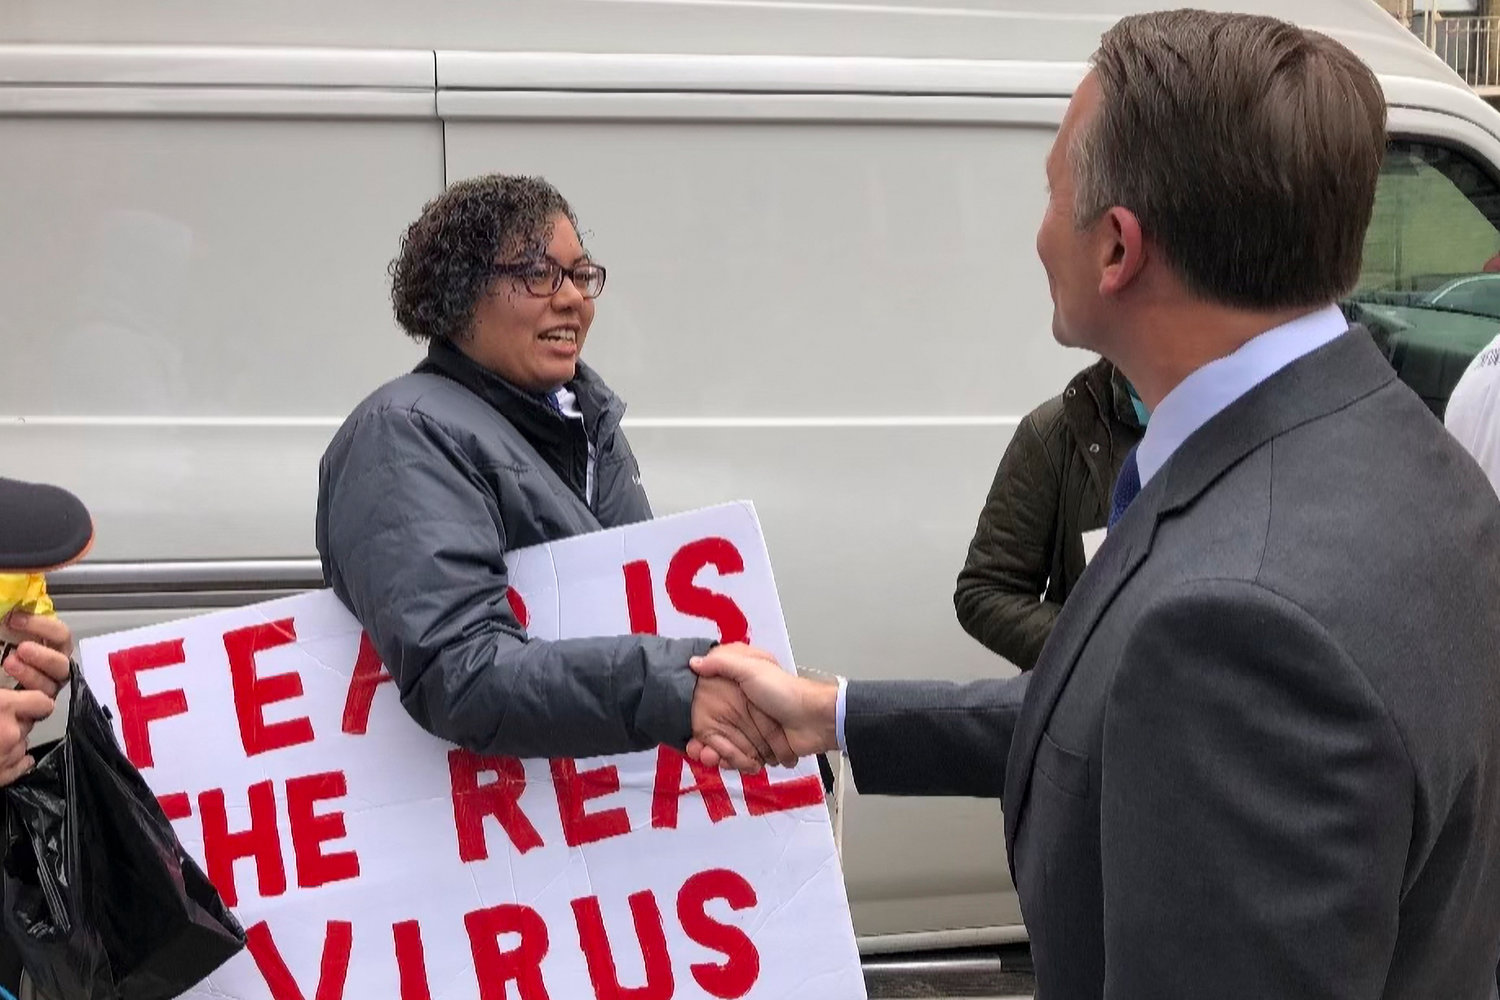 Republican gubernatorial candidate Rob Astorino shakes hands with an anti-vaccine mandate protester who is said to have later held up a sign displaying a swastika during a rally held outside Assemblyman Jeffrey Dinowitz’s office on Kingsbridge Avenue. Astorino claims he didn’t see the sign when he met the woman there, and added he’s just as upset about its usage there as Dinowitz was.